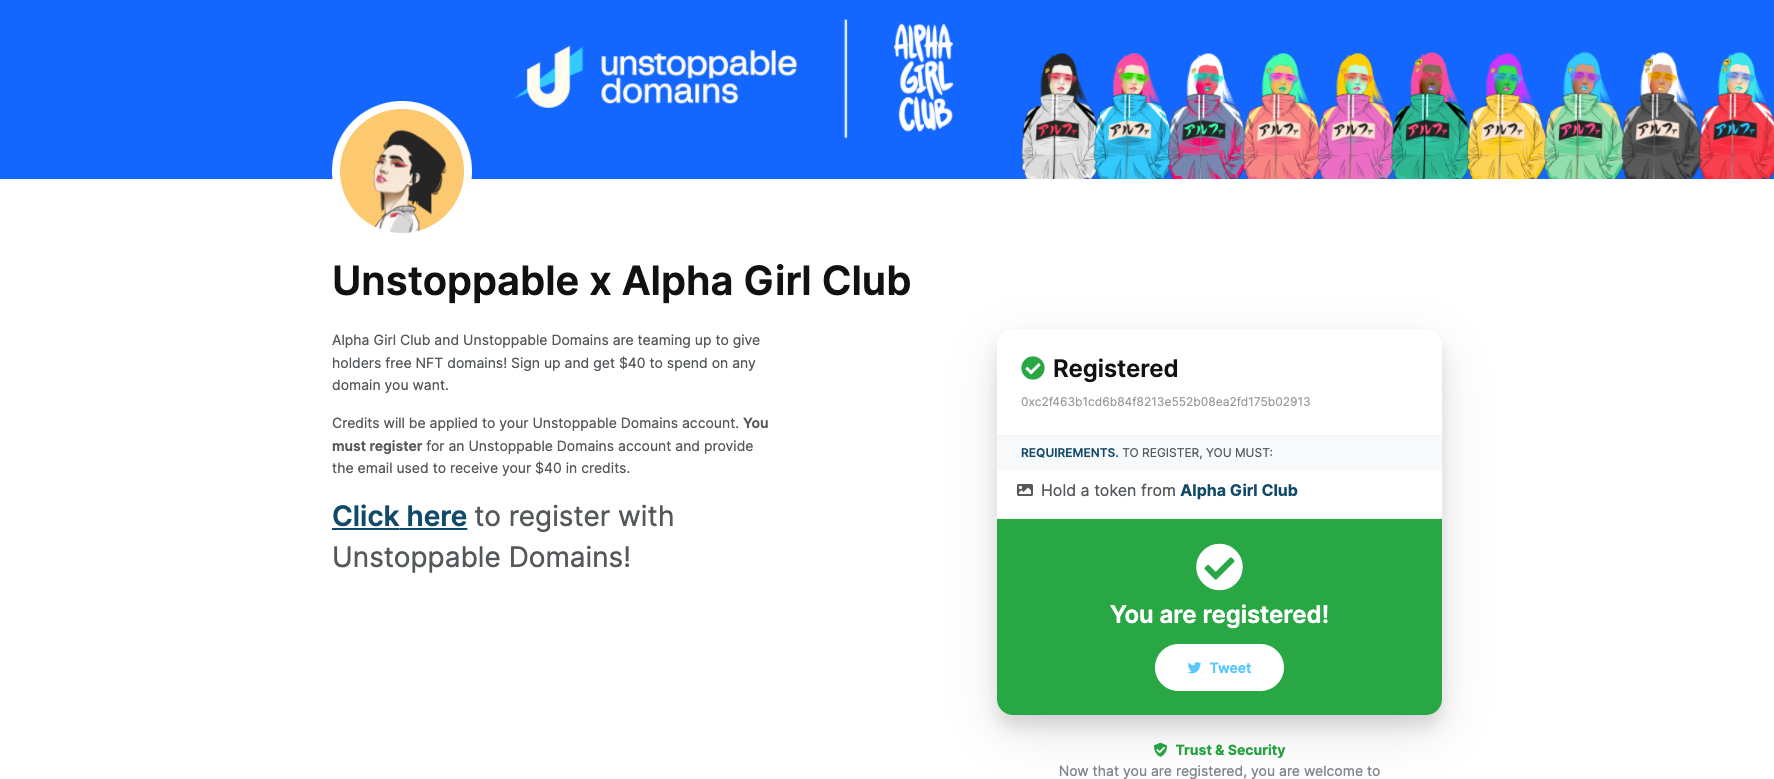 AlphaGirlClub partners with Unstoppable domains to offer free domains to holders